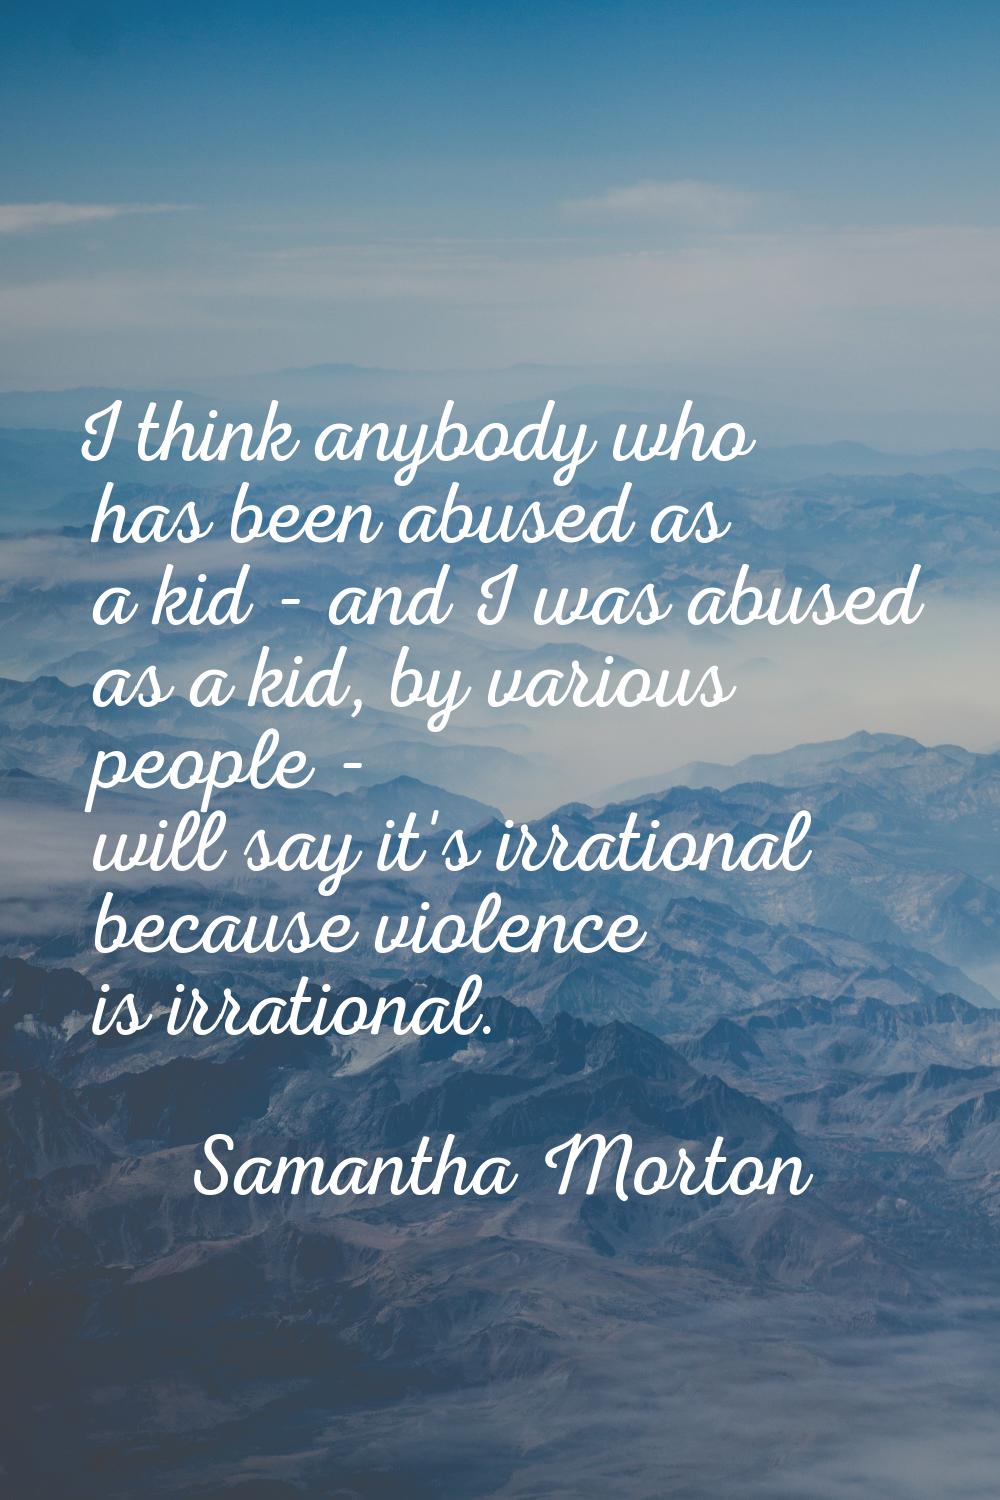 I think anybody who has been abused as a kid - and I was abused as a kid, by various people - will 